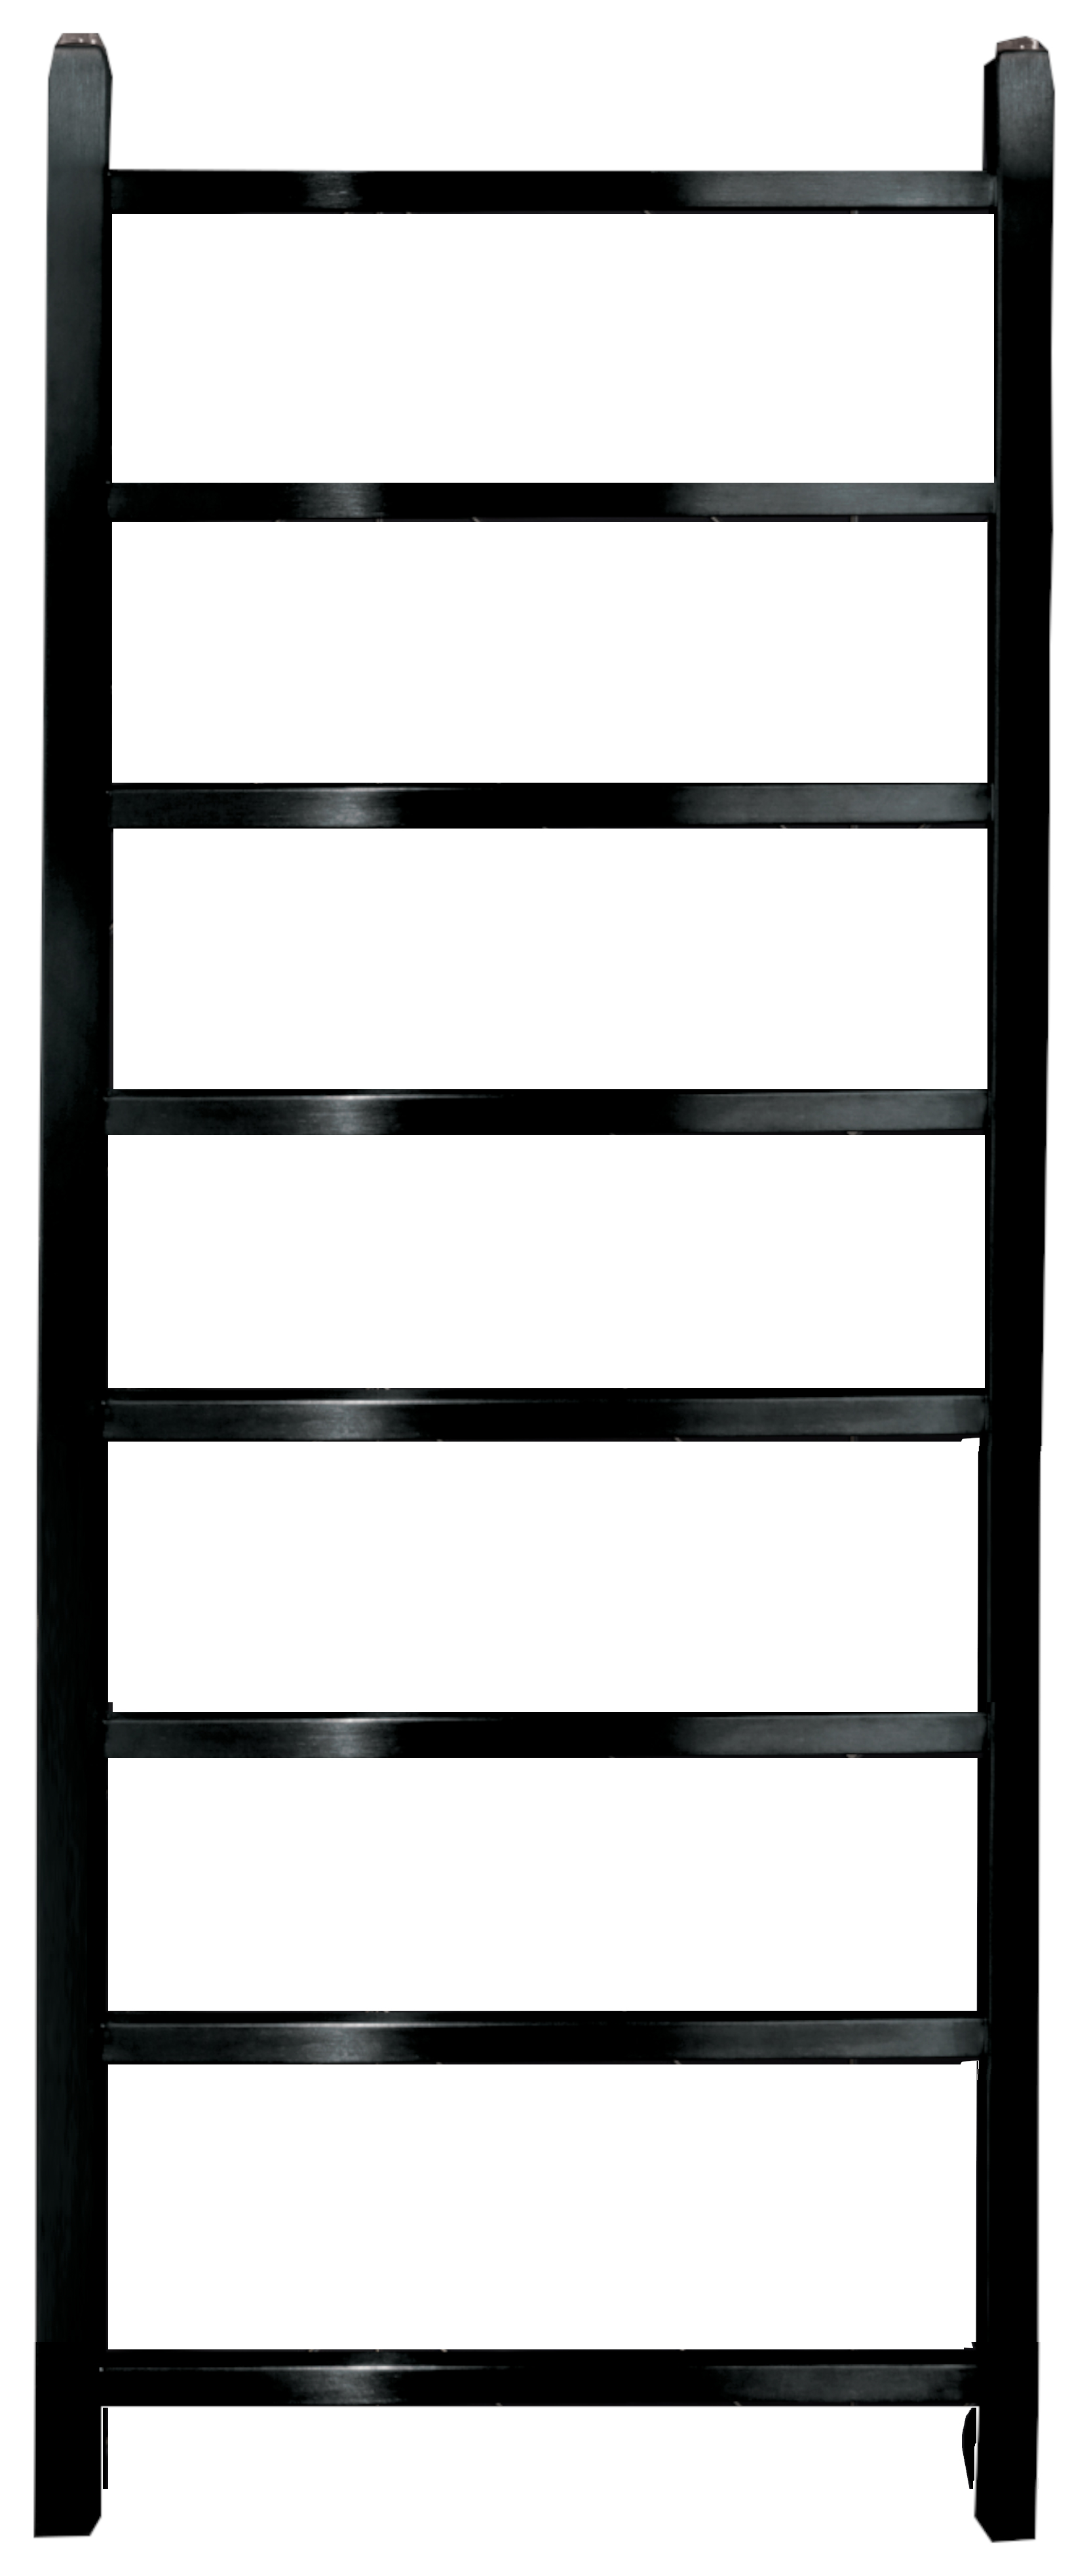 Image of Towelrads Diva Brushed Black Chrome Dry Electric Non Thermostatic Towel Radiator - 1200 x 500mm